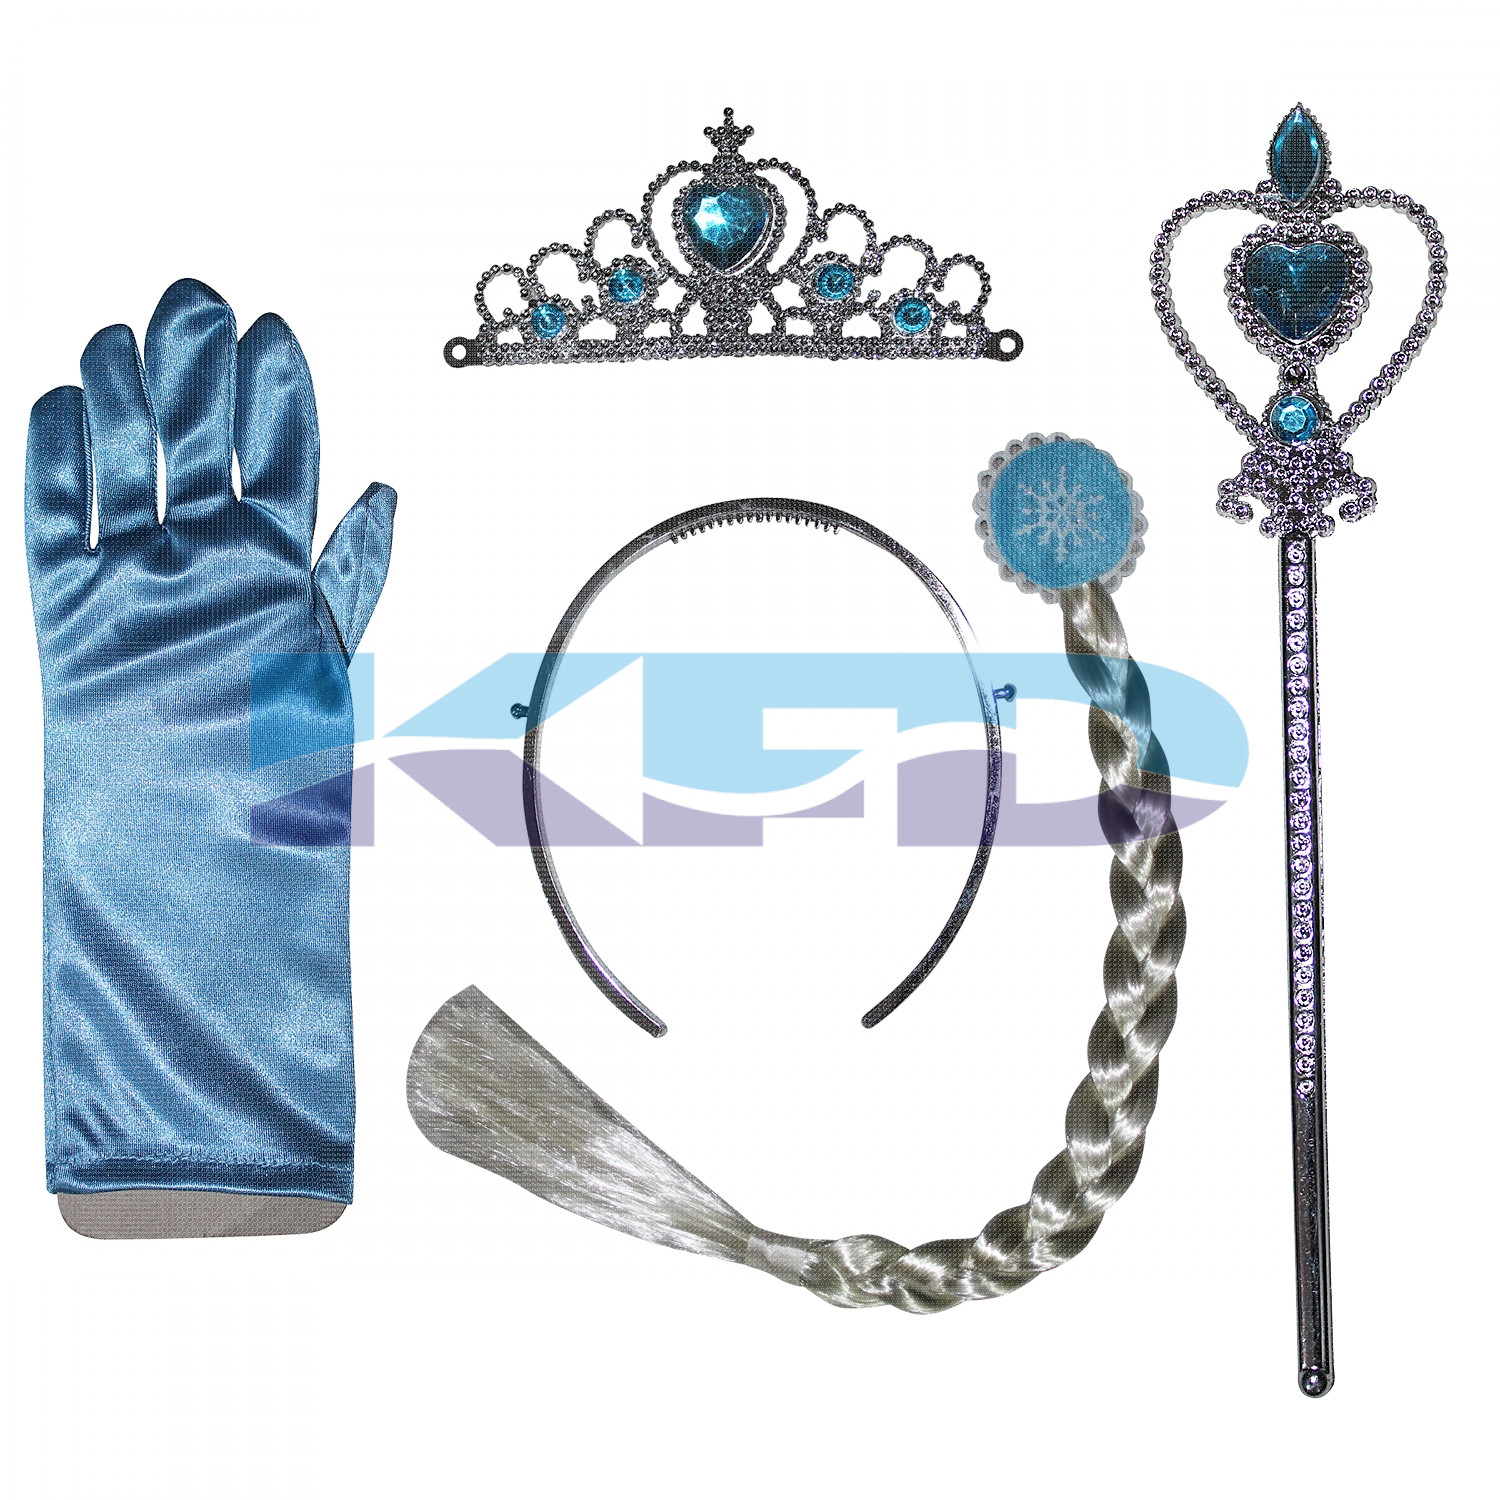 Princes Elsa Accessories With Gloves,western costume For School Annual function/Theme Party/Competition/Stage Shows/Birthday Party Dress